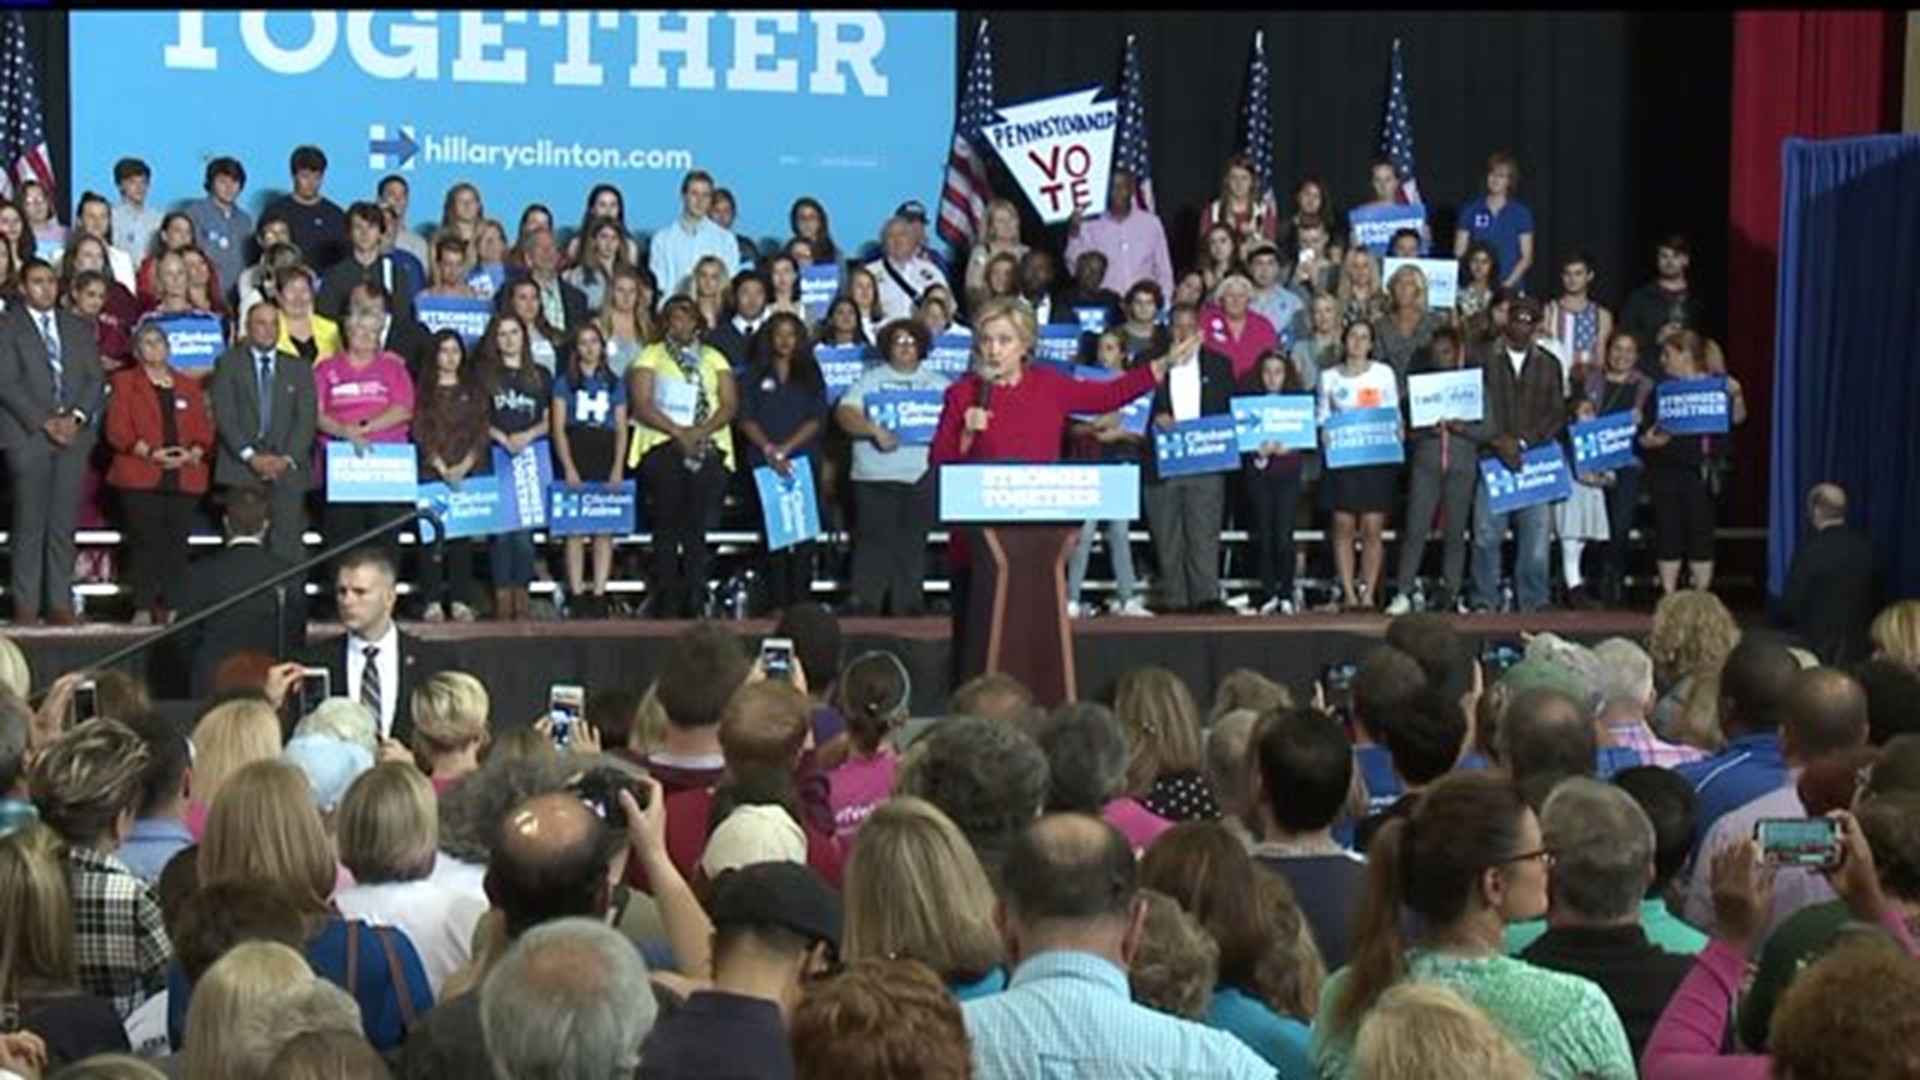 Hillary Clinton asking people to register to vote in Harrisburg